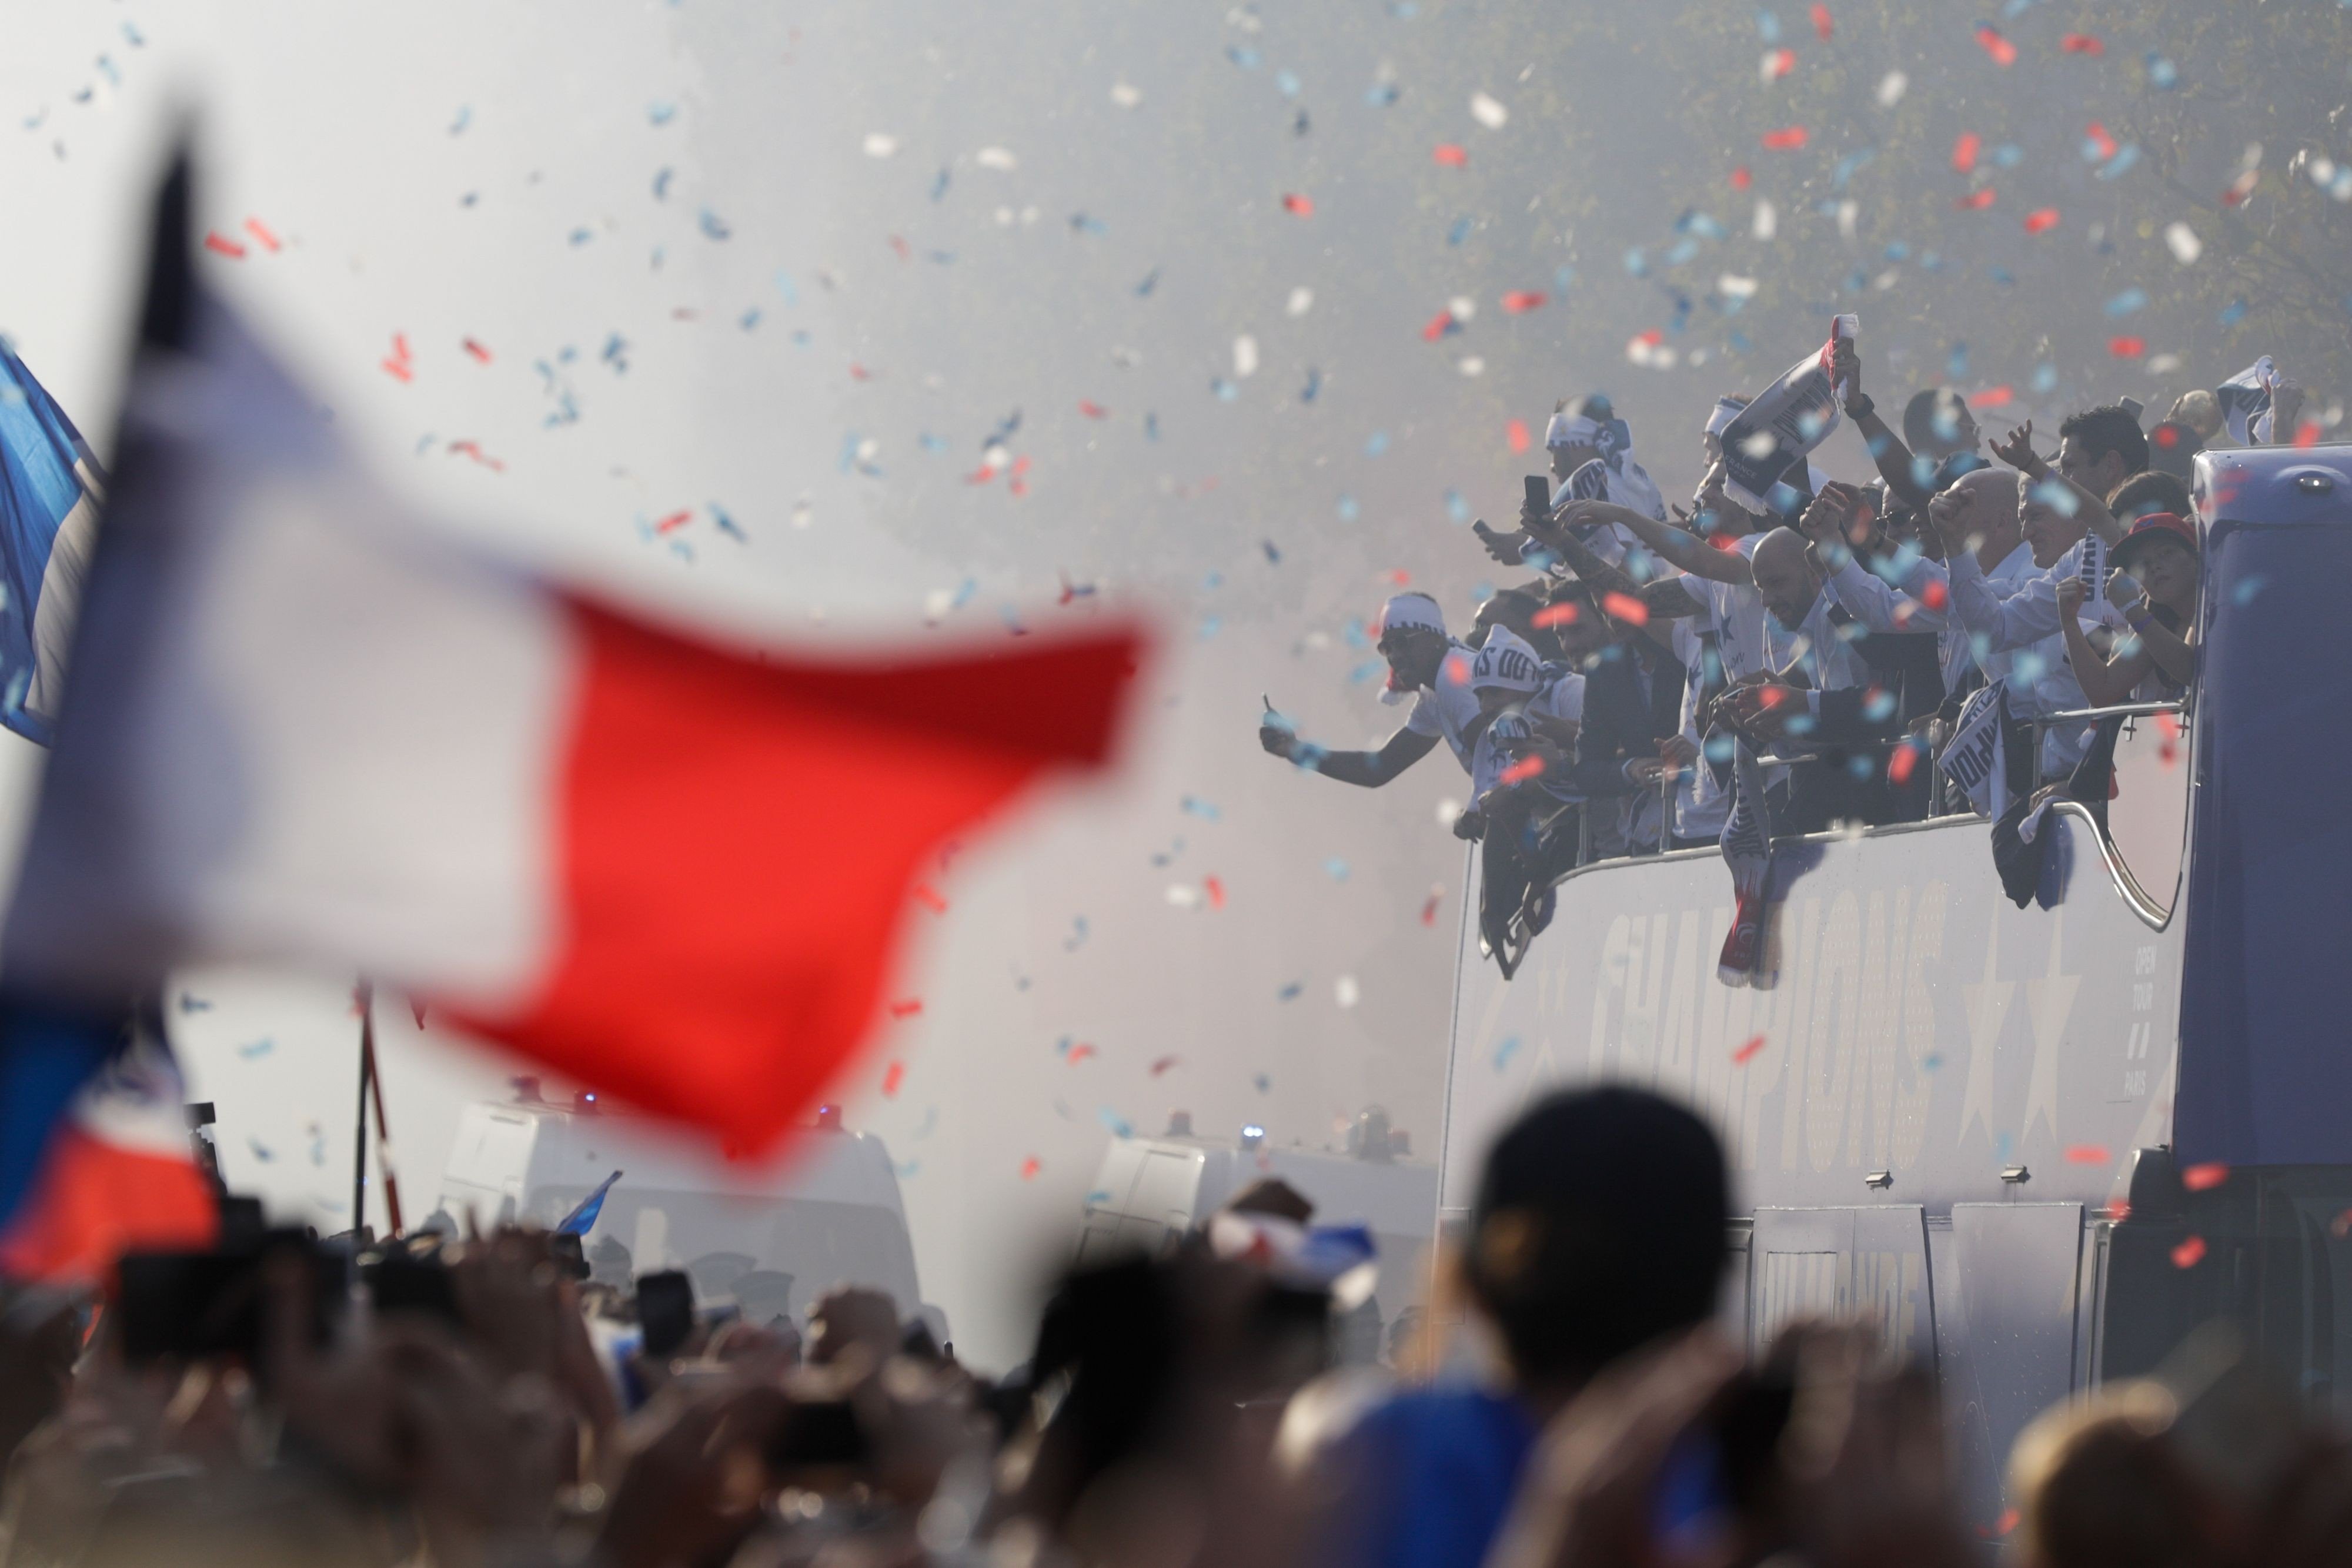 The French – whether native-born or immigrant – join in a celebration on the Champs-Elysee avenue in Paris on July 16 to welcome the national football team’s return after winning the World Cup in Russia. This is the vision of immigration and inclusive nationalism societies should be working towards. Photo: AFP